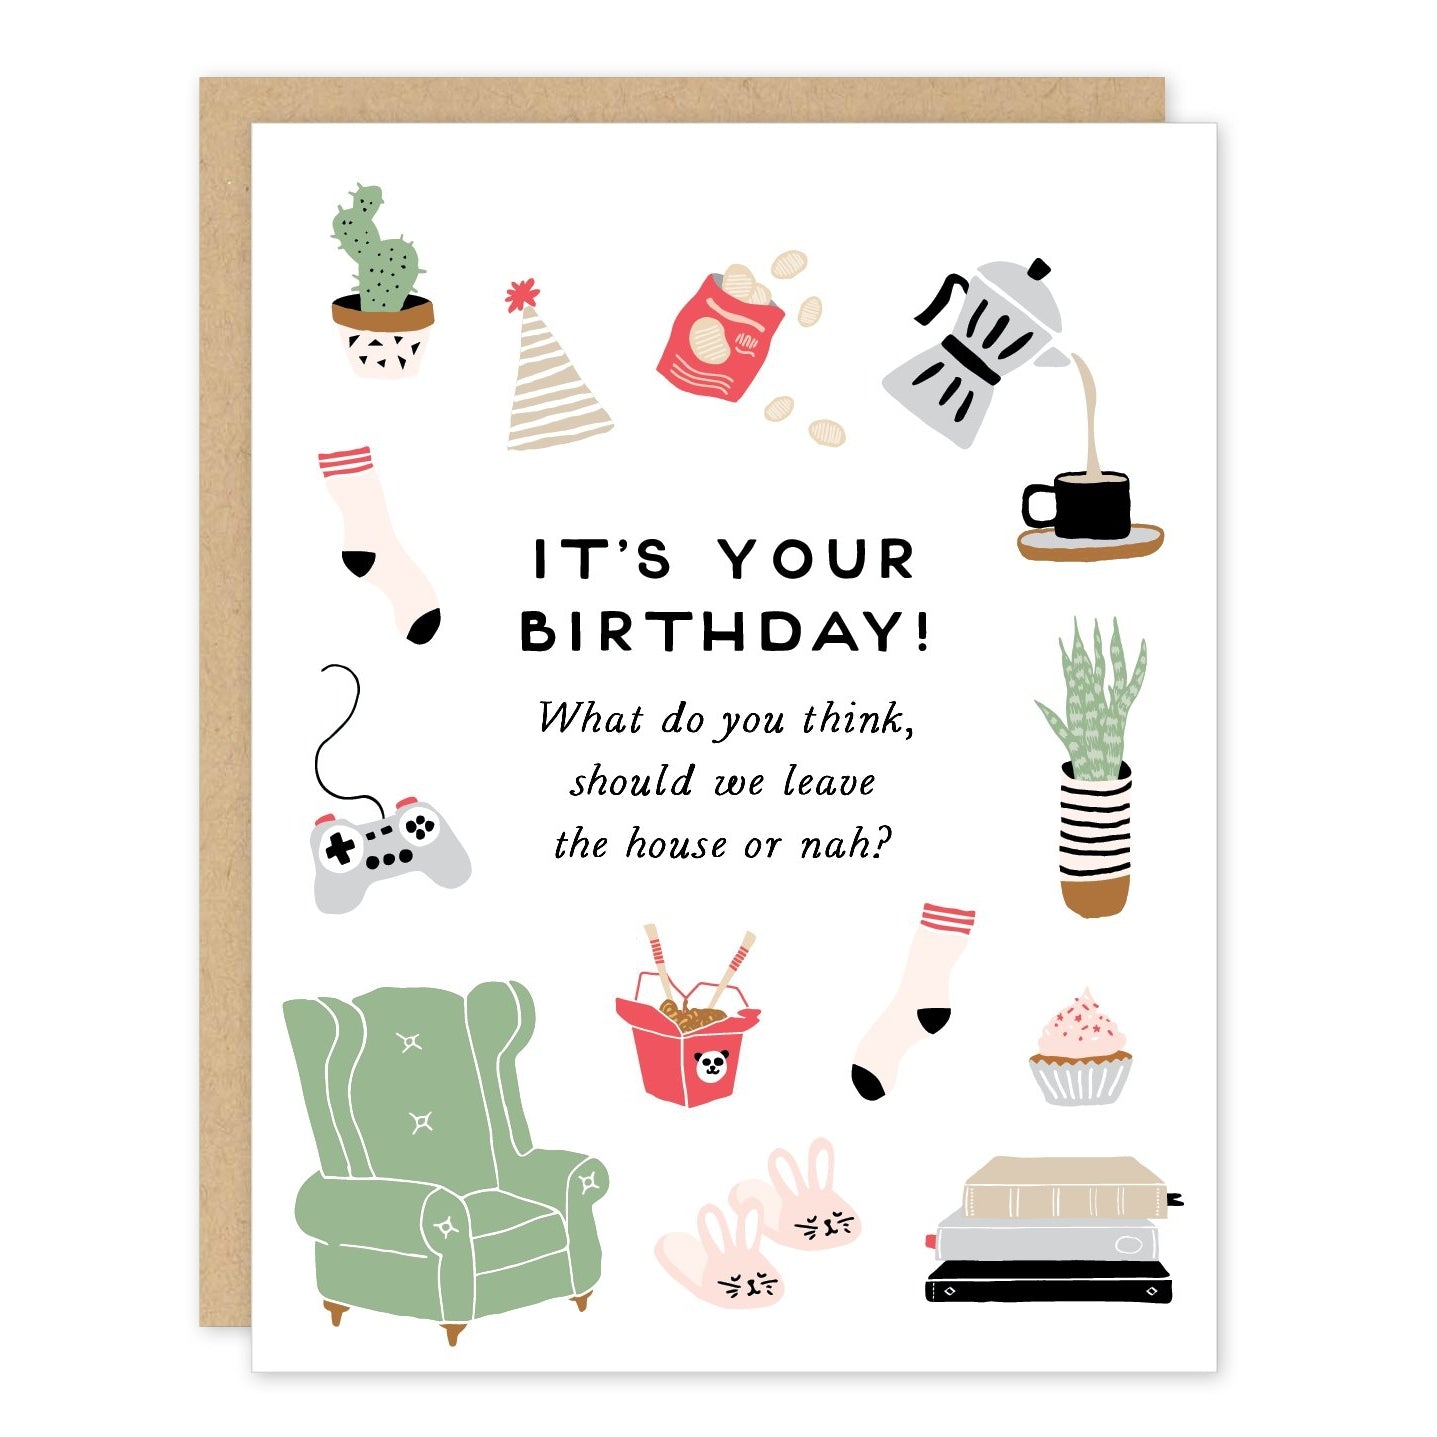 It's Your Birthday! Homebody Greeting Card